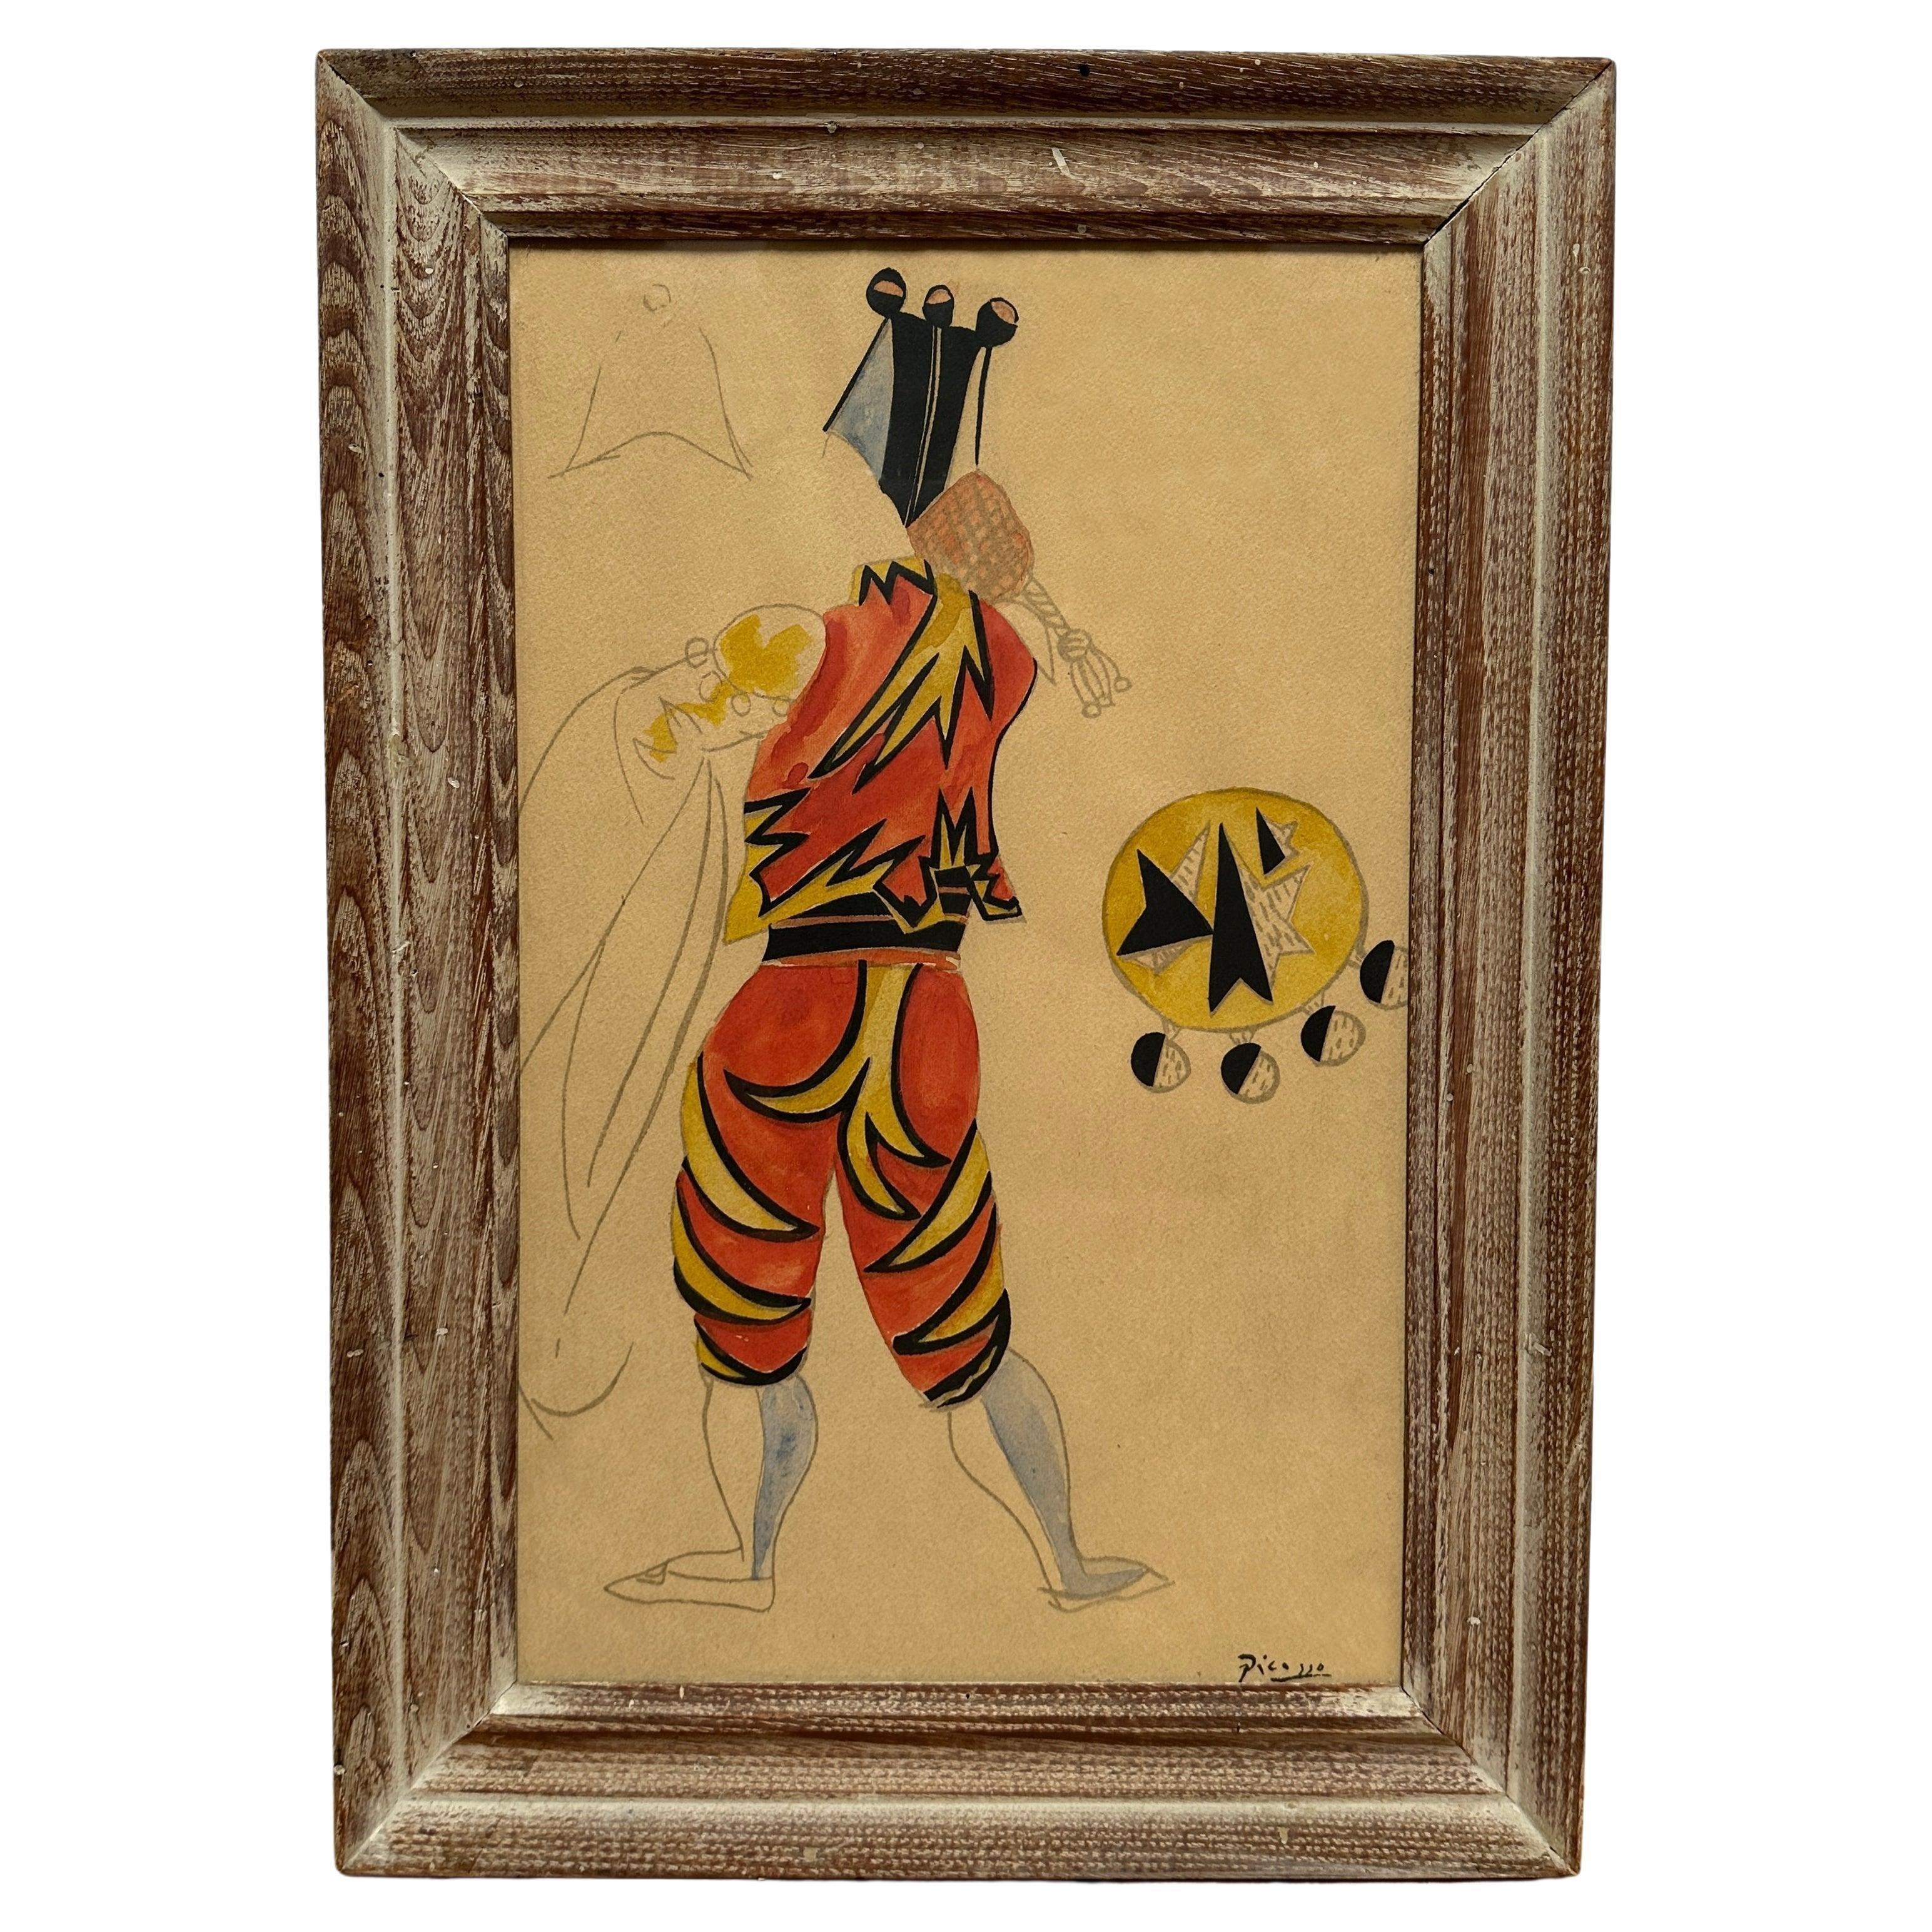 Explore Picasso's artistic journey through watercolored lithographs featuring sketches numbered #3 and #7 from his iconic "Ballet Three Cornered Hat" series.  Created during his collaboration with the Ballets Russes in 1919, these gouache studies